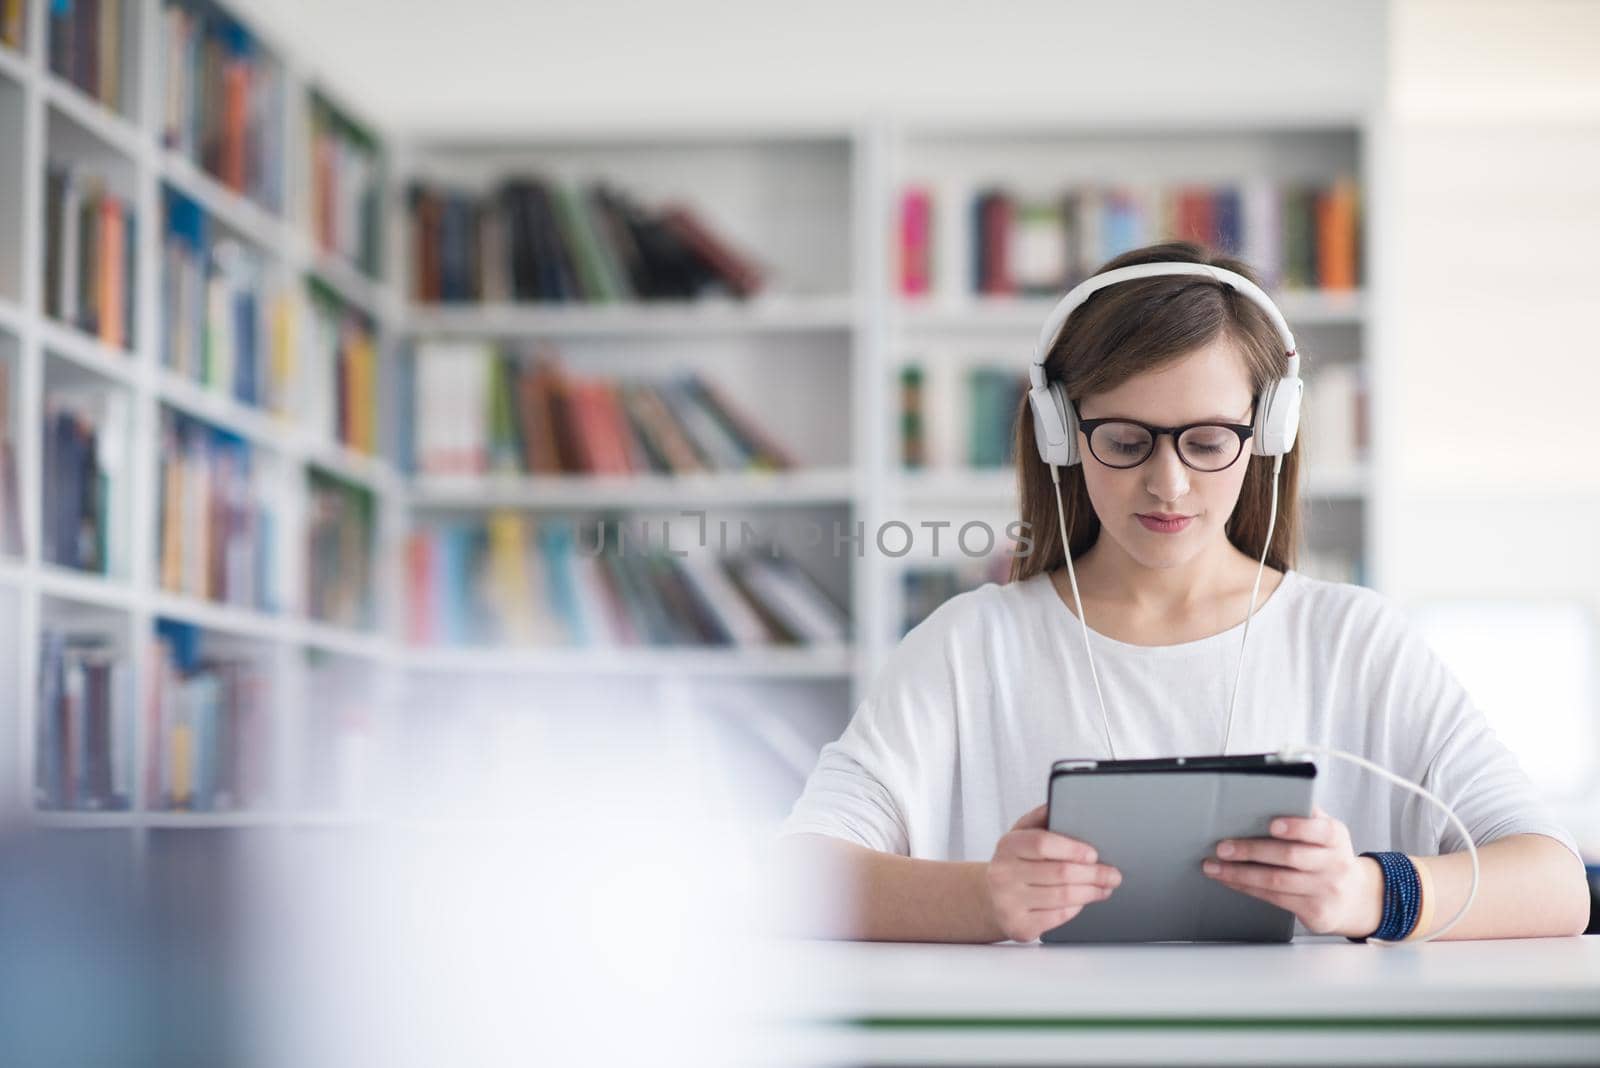 female student study in school library, using tablet and searching for information’s on internet. Listening music and lessons on white headphones